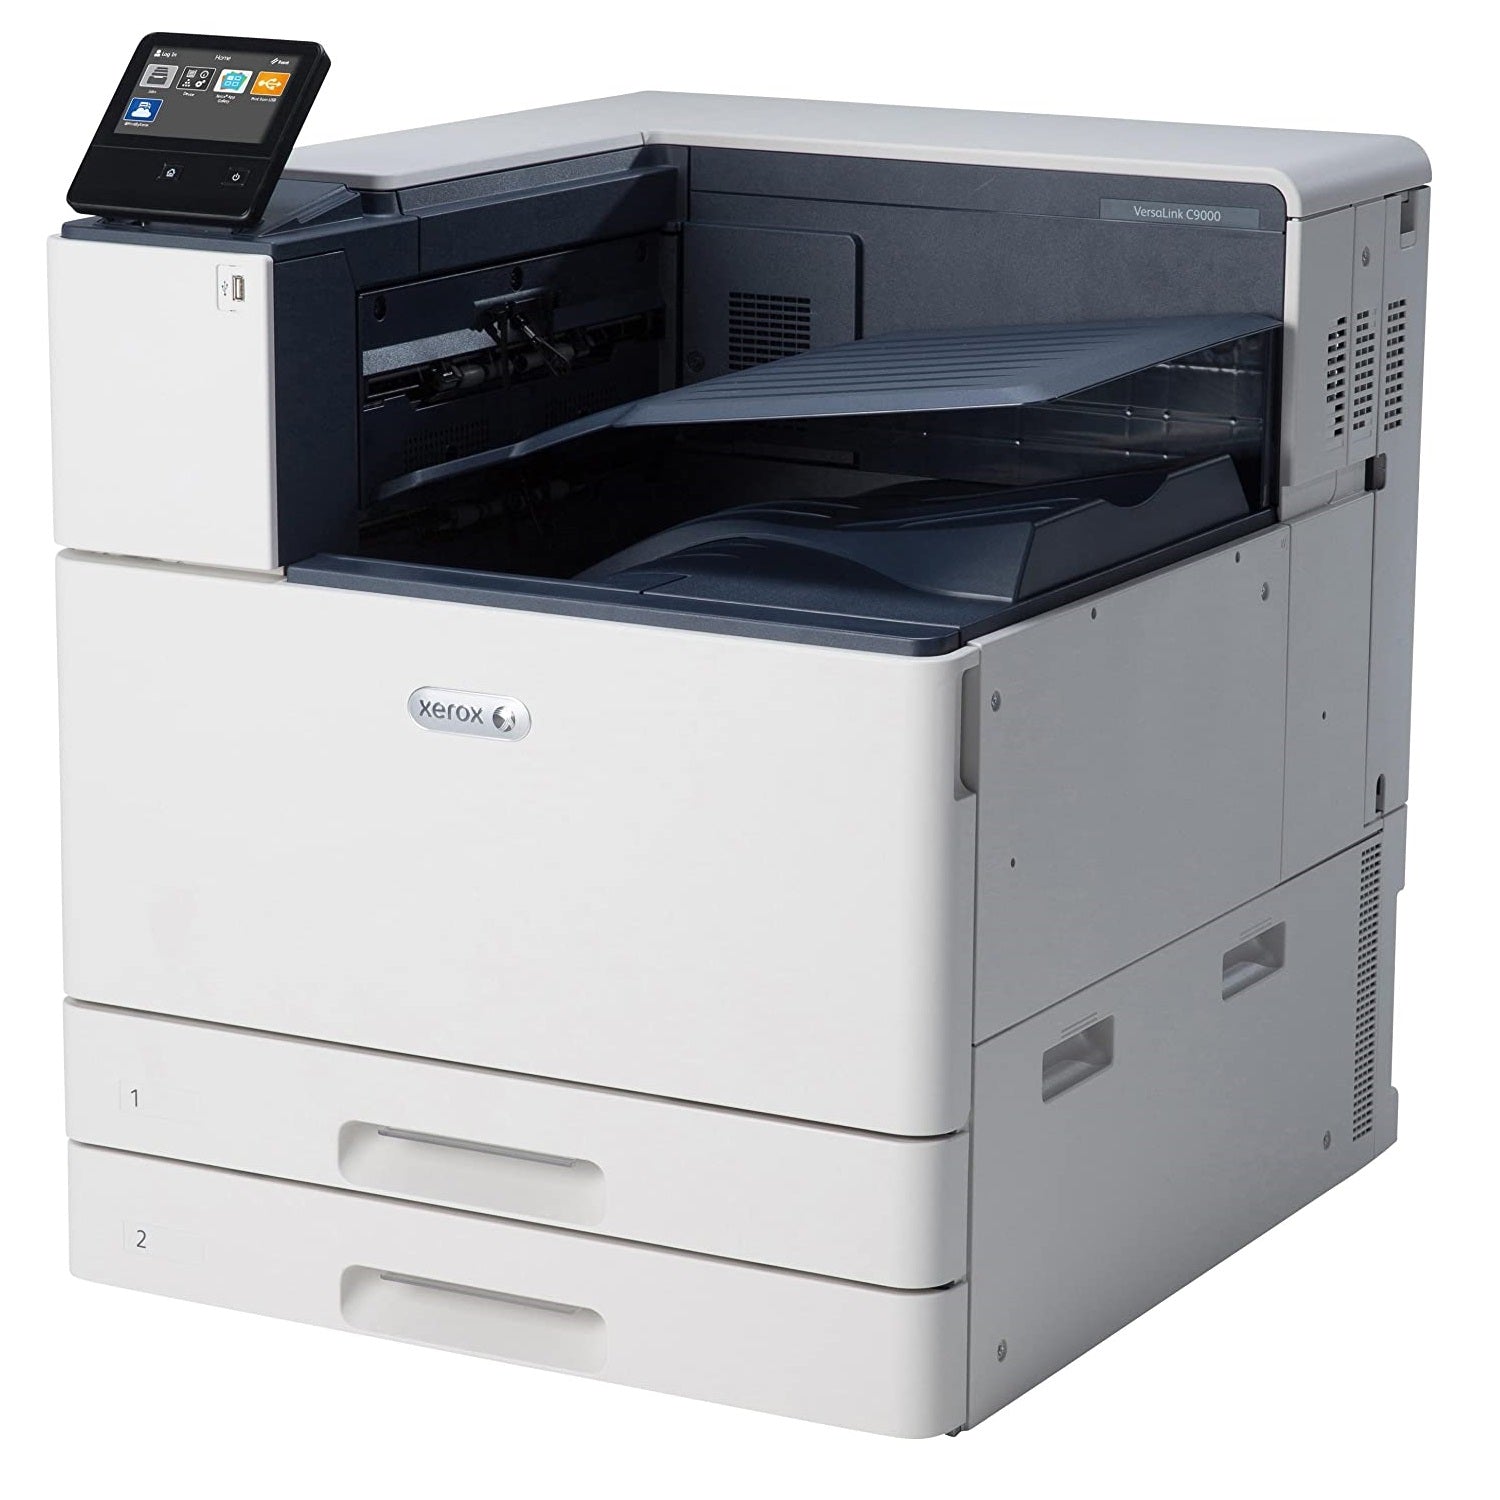 Xerox VersaLink C9000DT C9000/DT Laser Color Tabloid LED Printer, 11x17, 2400 x 1200 DPI Print Resolution With Tandem Trays And Cabinet